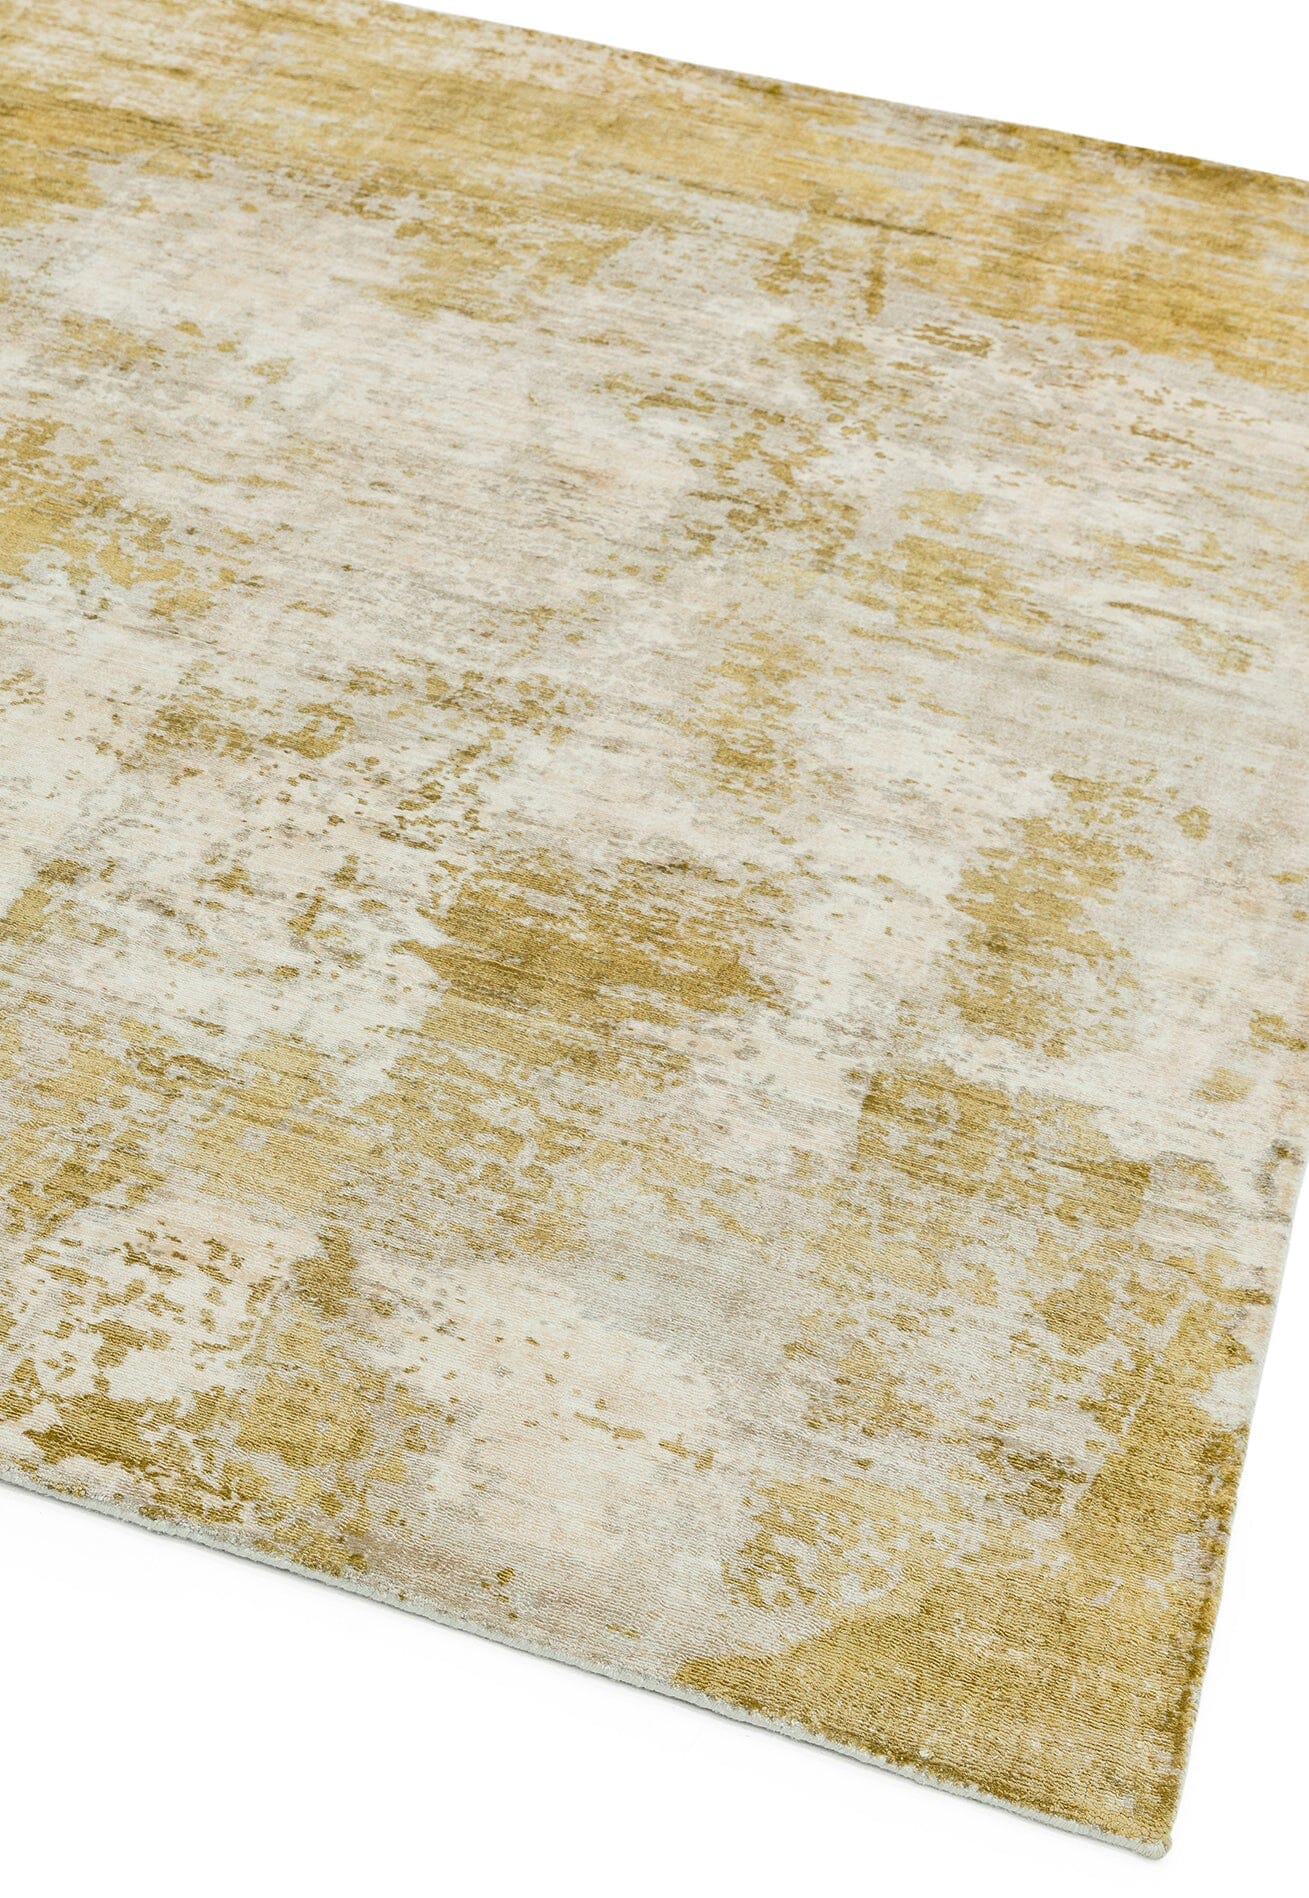  Asiatic Carpets-Asiatic Carpets Gatsby Hand Woven Rug Autumn - 240 x 340cm-Yellow, Gold 013 